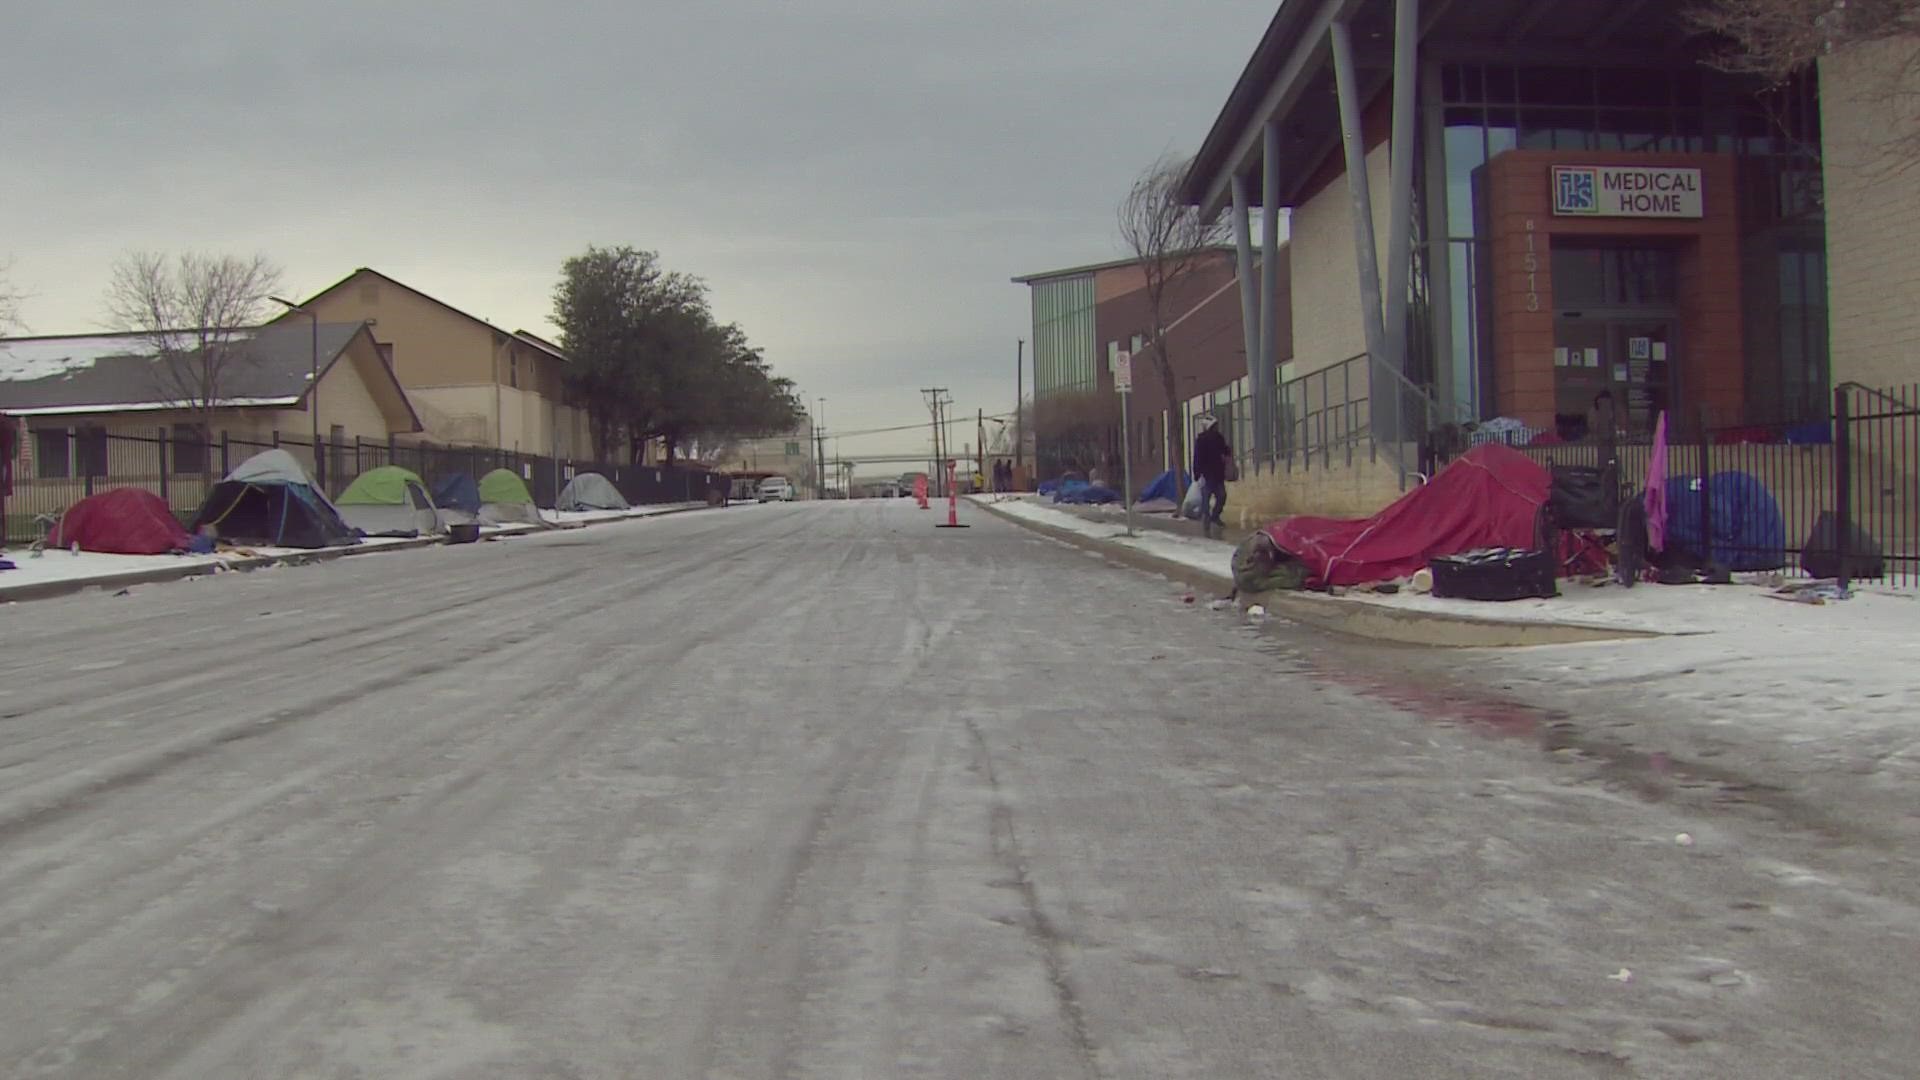 Homeless people in North Texas are feeling the brunt of the ice storm.